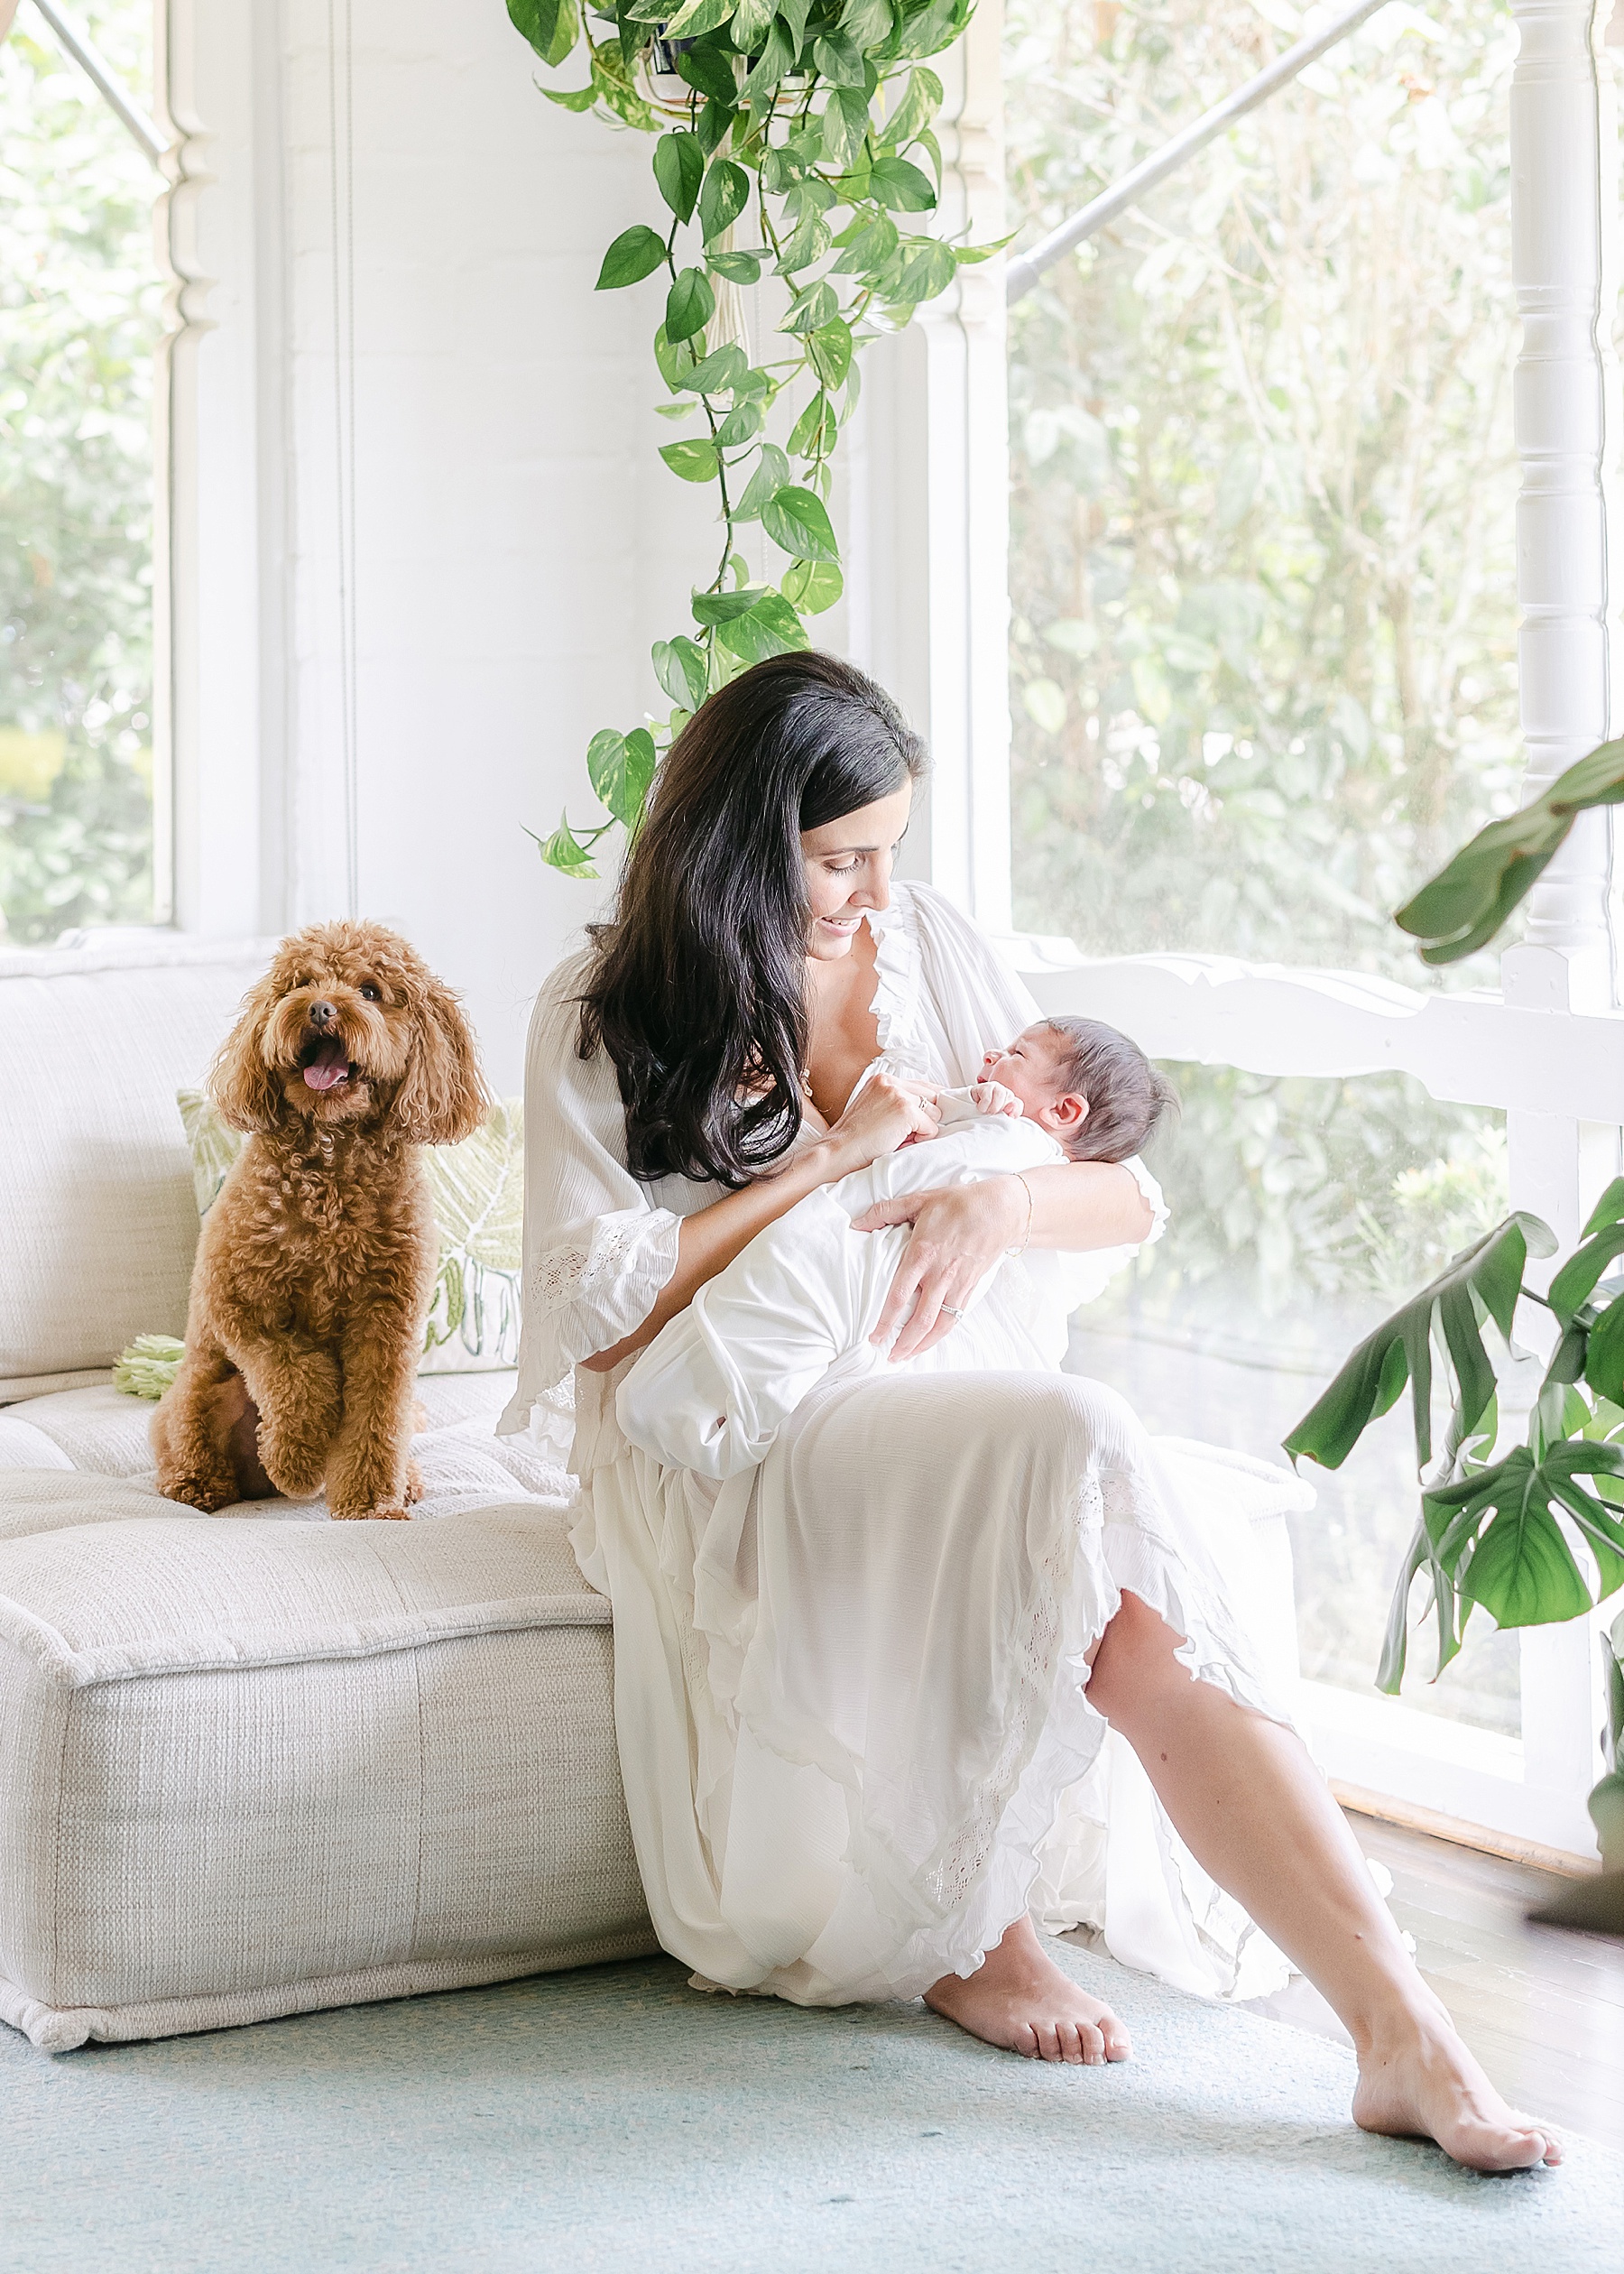 woman in long white dress holding newborn baby boy in sunroom with hanging plants and dog